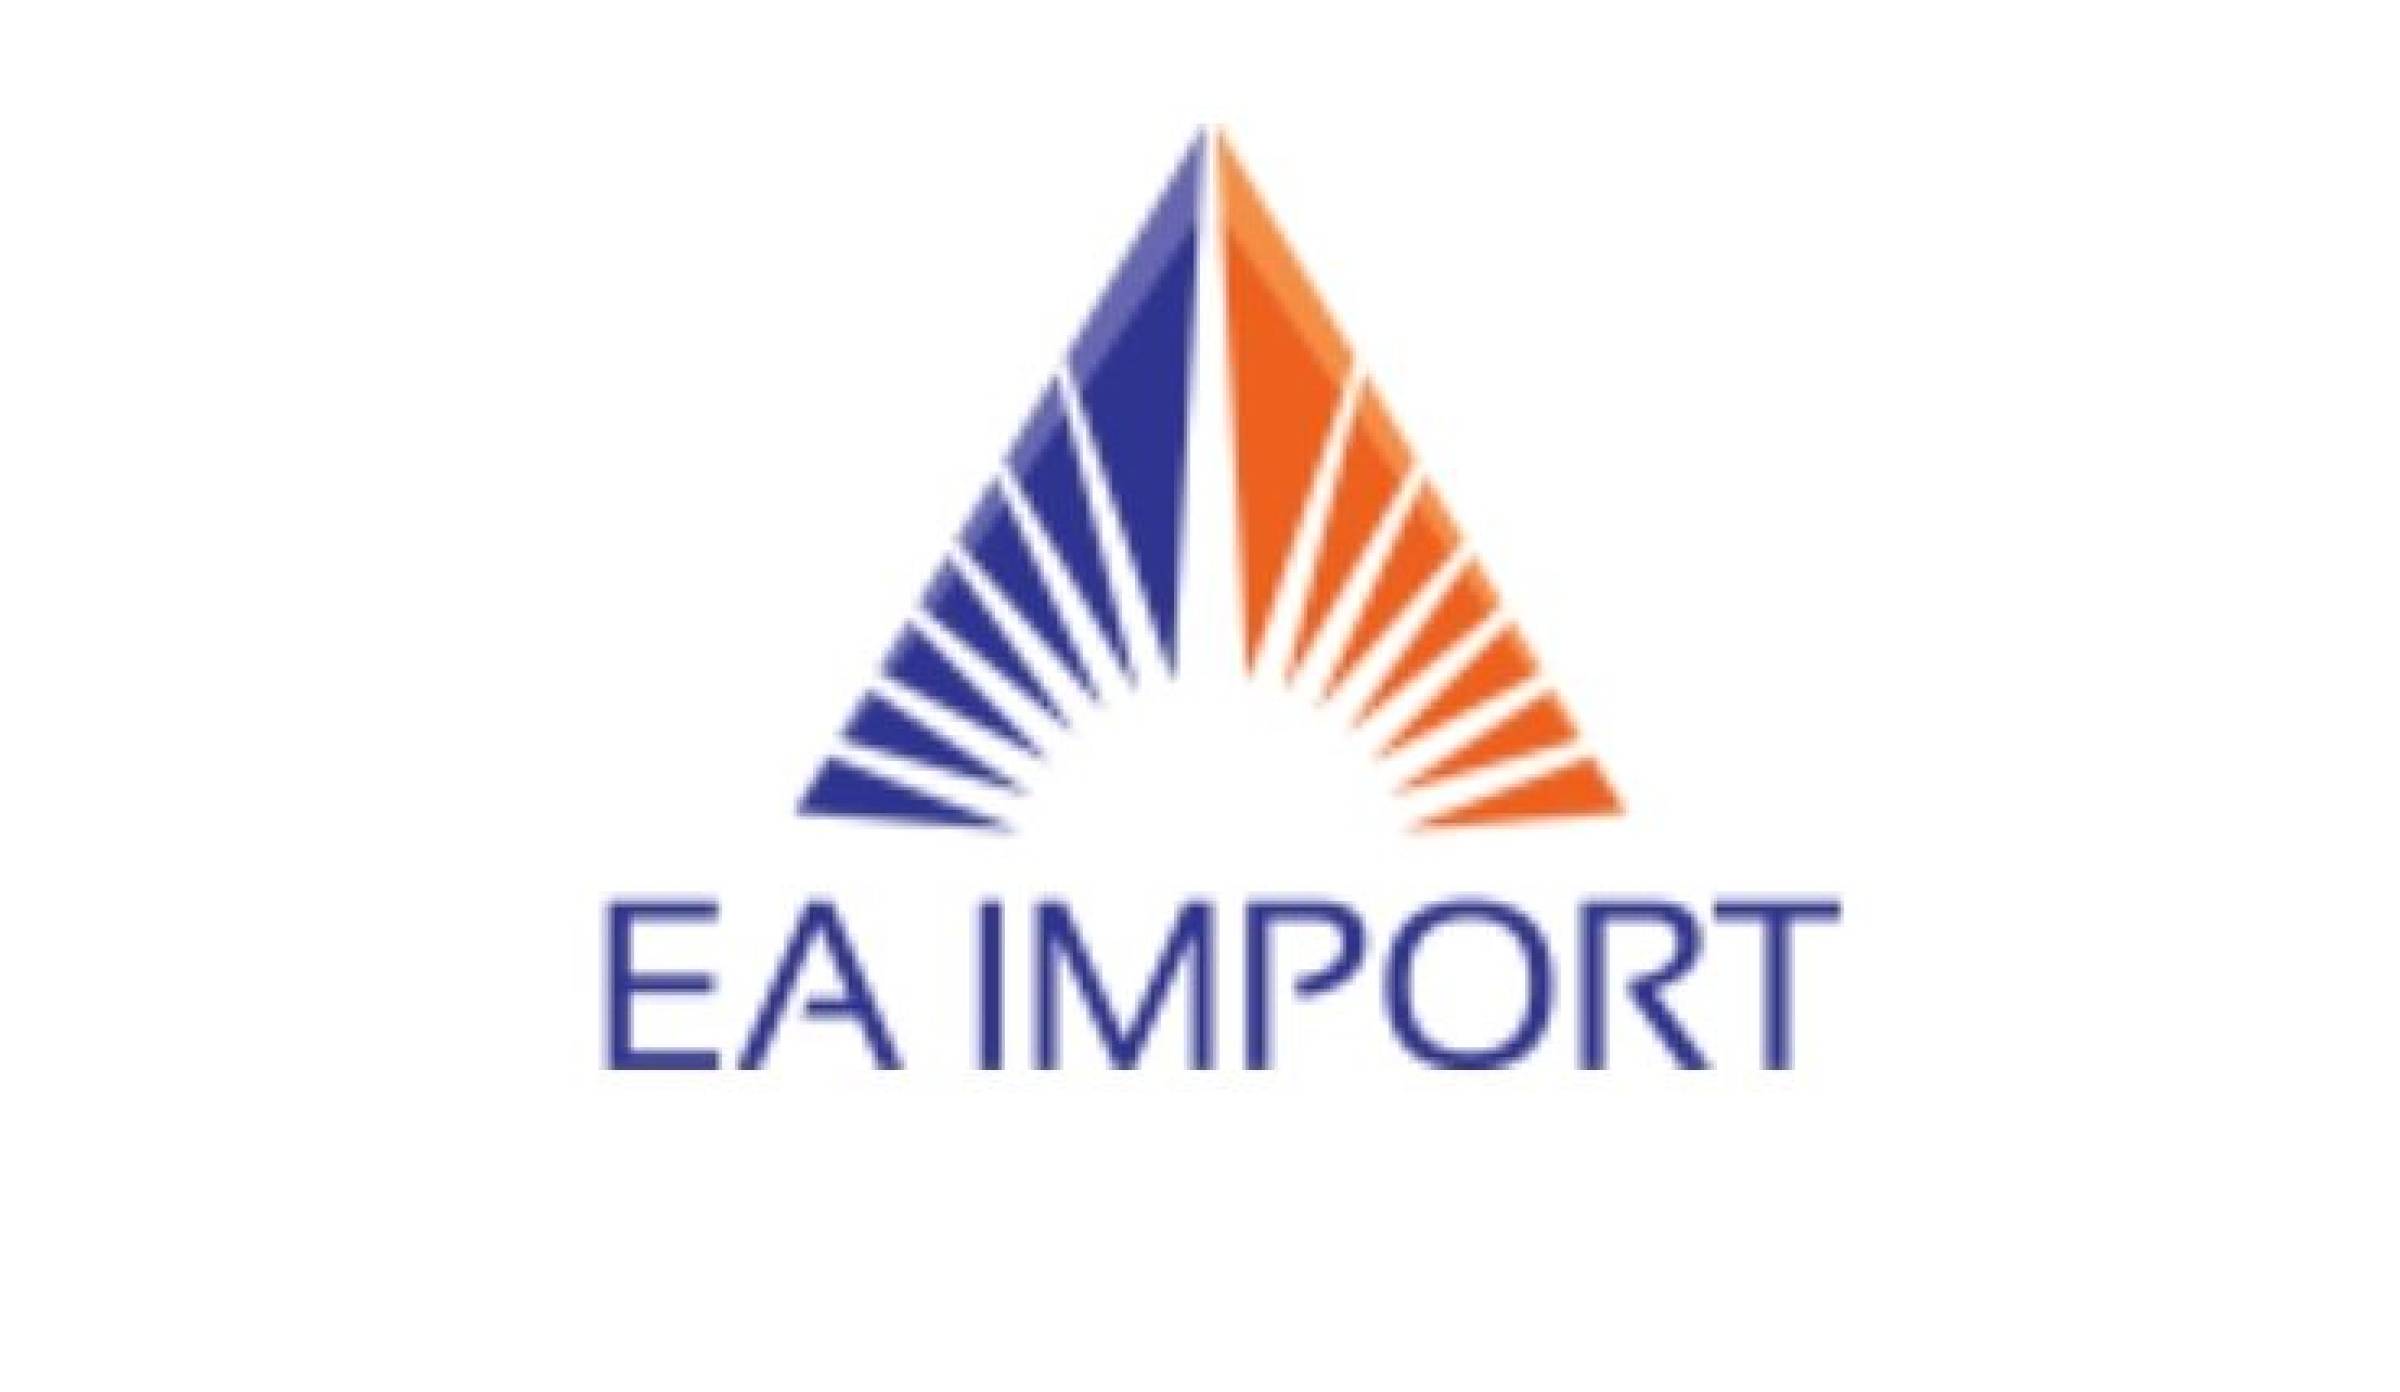 EA import and Export